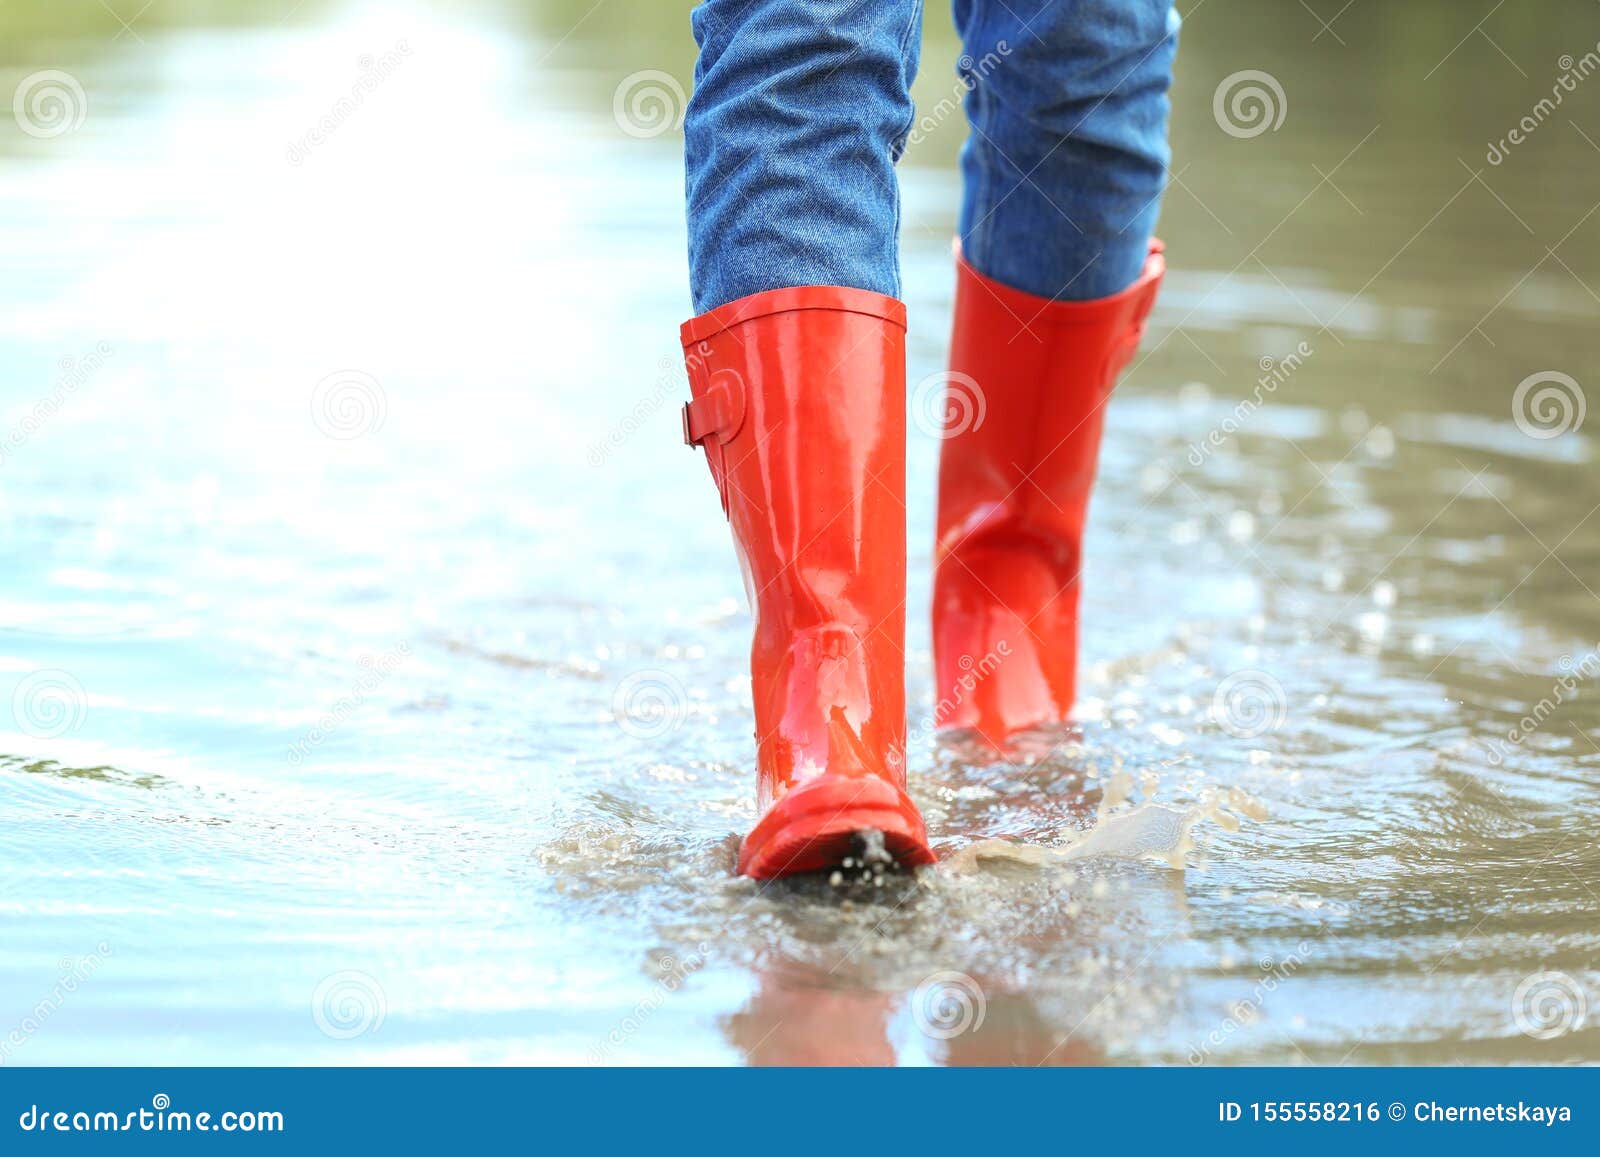 With Red Rubber Boots in Puddle, Closeup. Rainy Weather Stock Photo ...